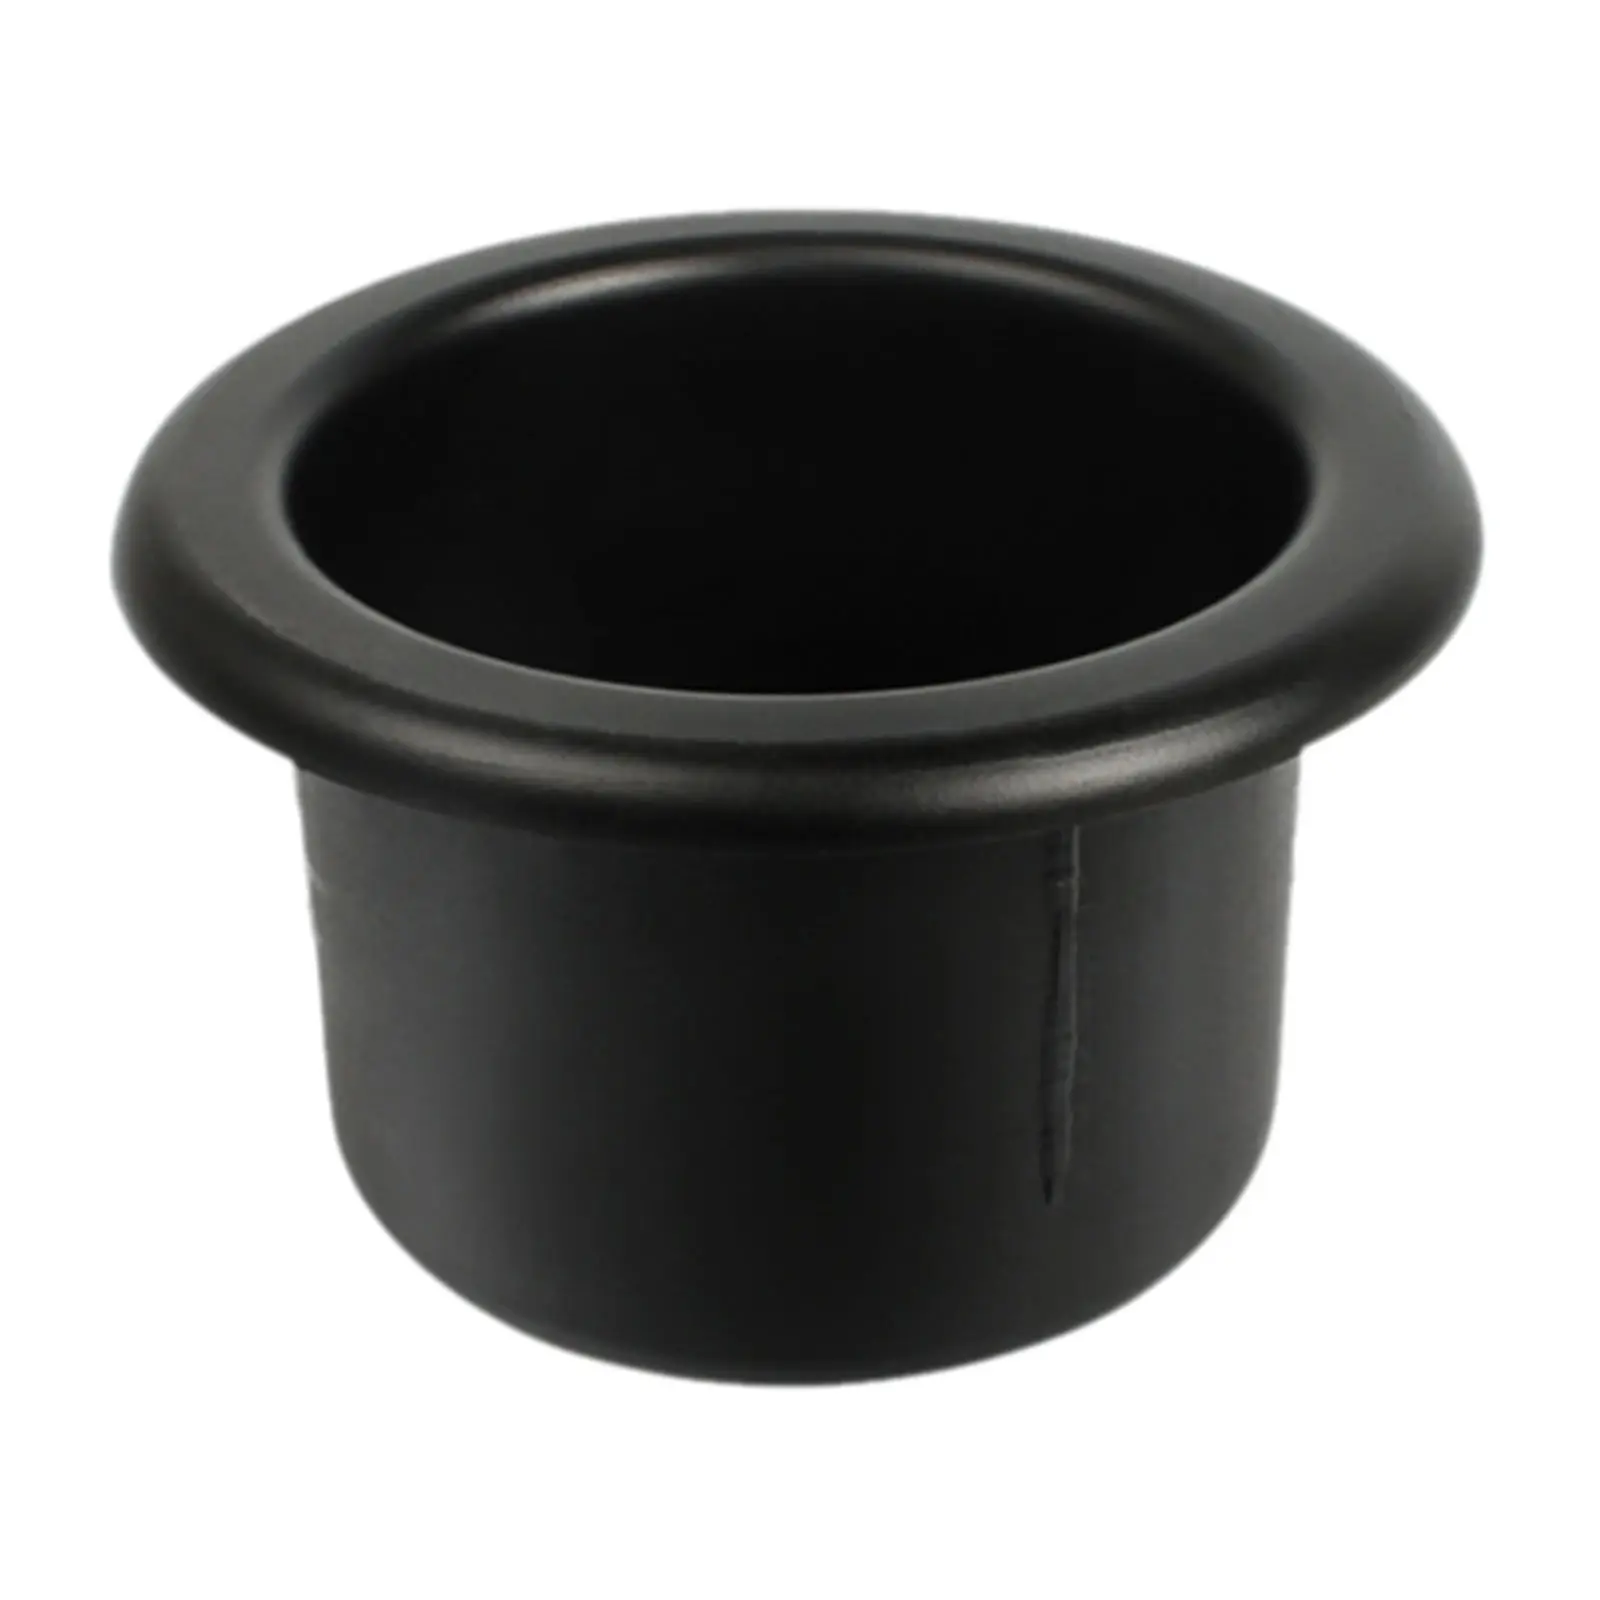 Universal Black Plastic Cup Drink Can Holder 100mm Dia for Boat Marine RV Install almost anywhere table counter top dashboard